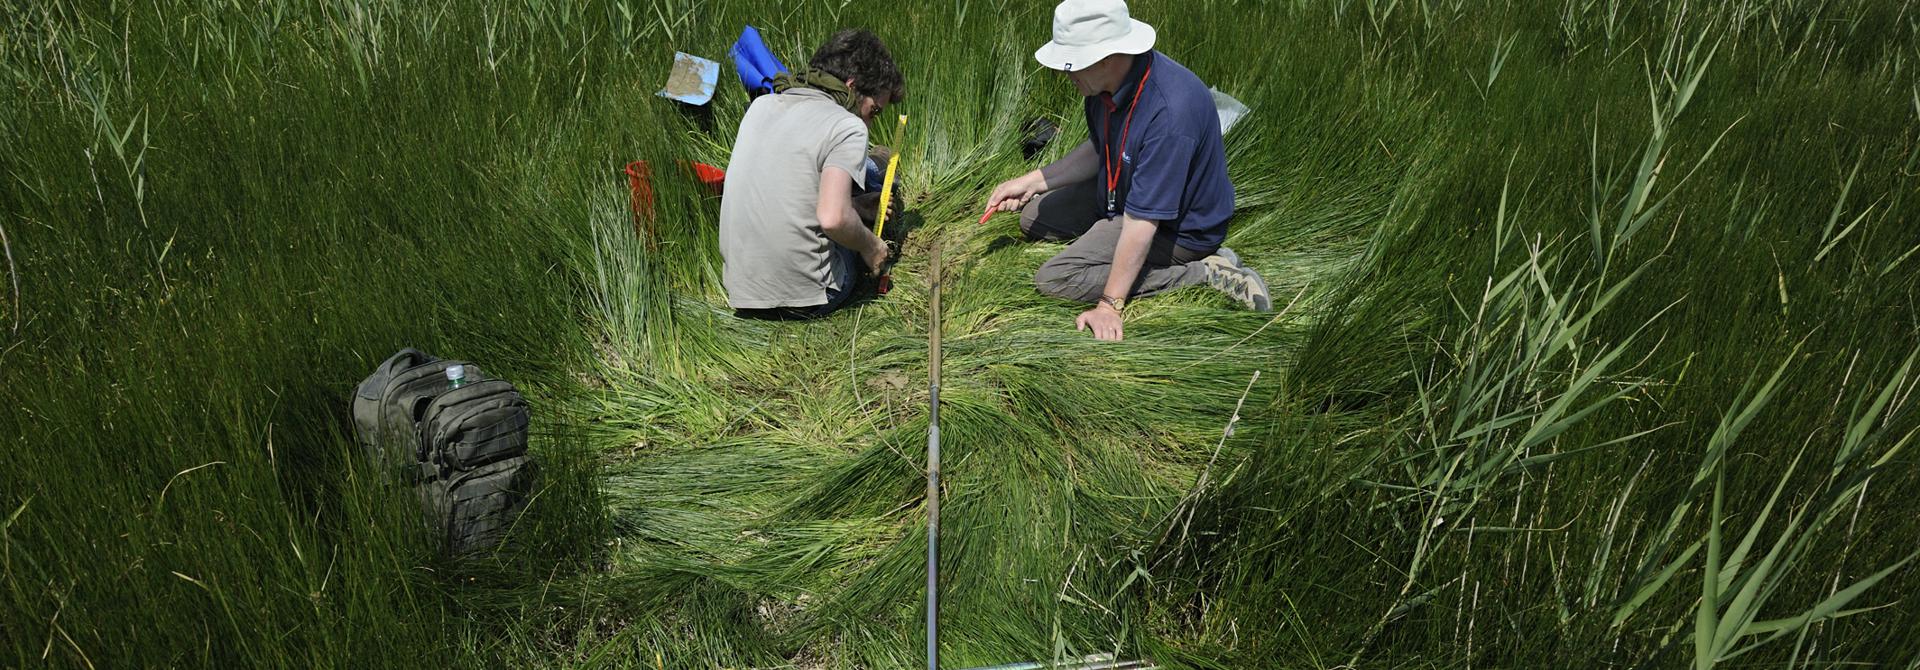 Caska - Pag-The geological coring in Caska’s marshes provide the data for the reconstruction of paleo-landscape and sea level changes that have occurred since Roman times. (Photo: Loïc Damelet)